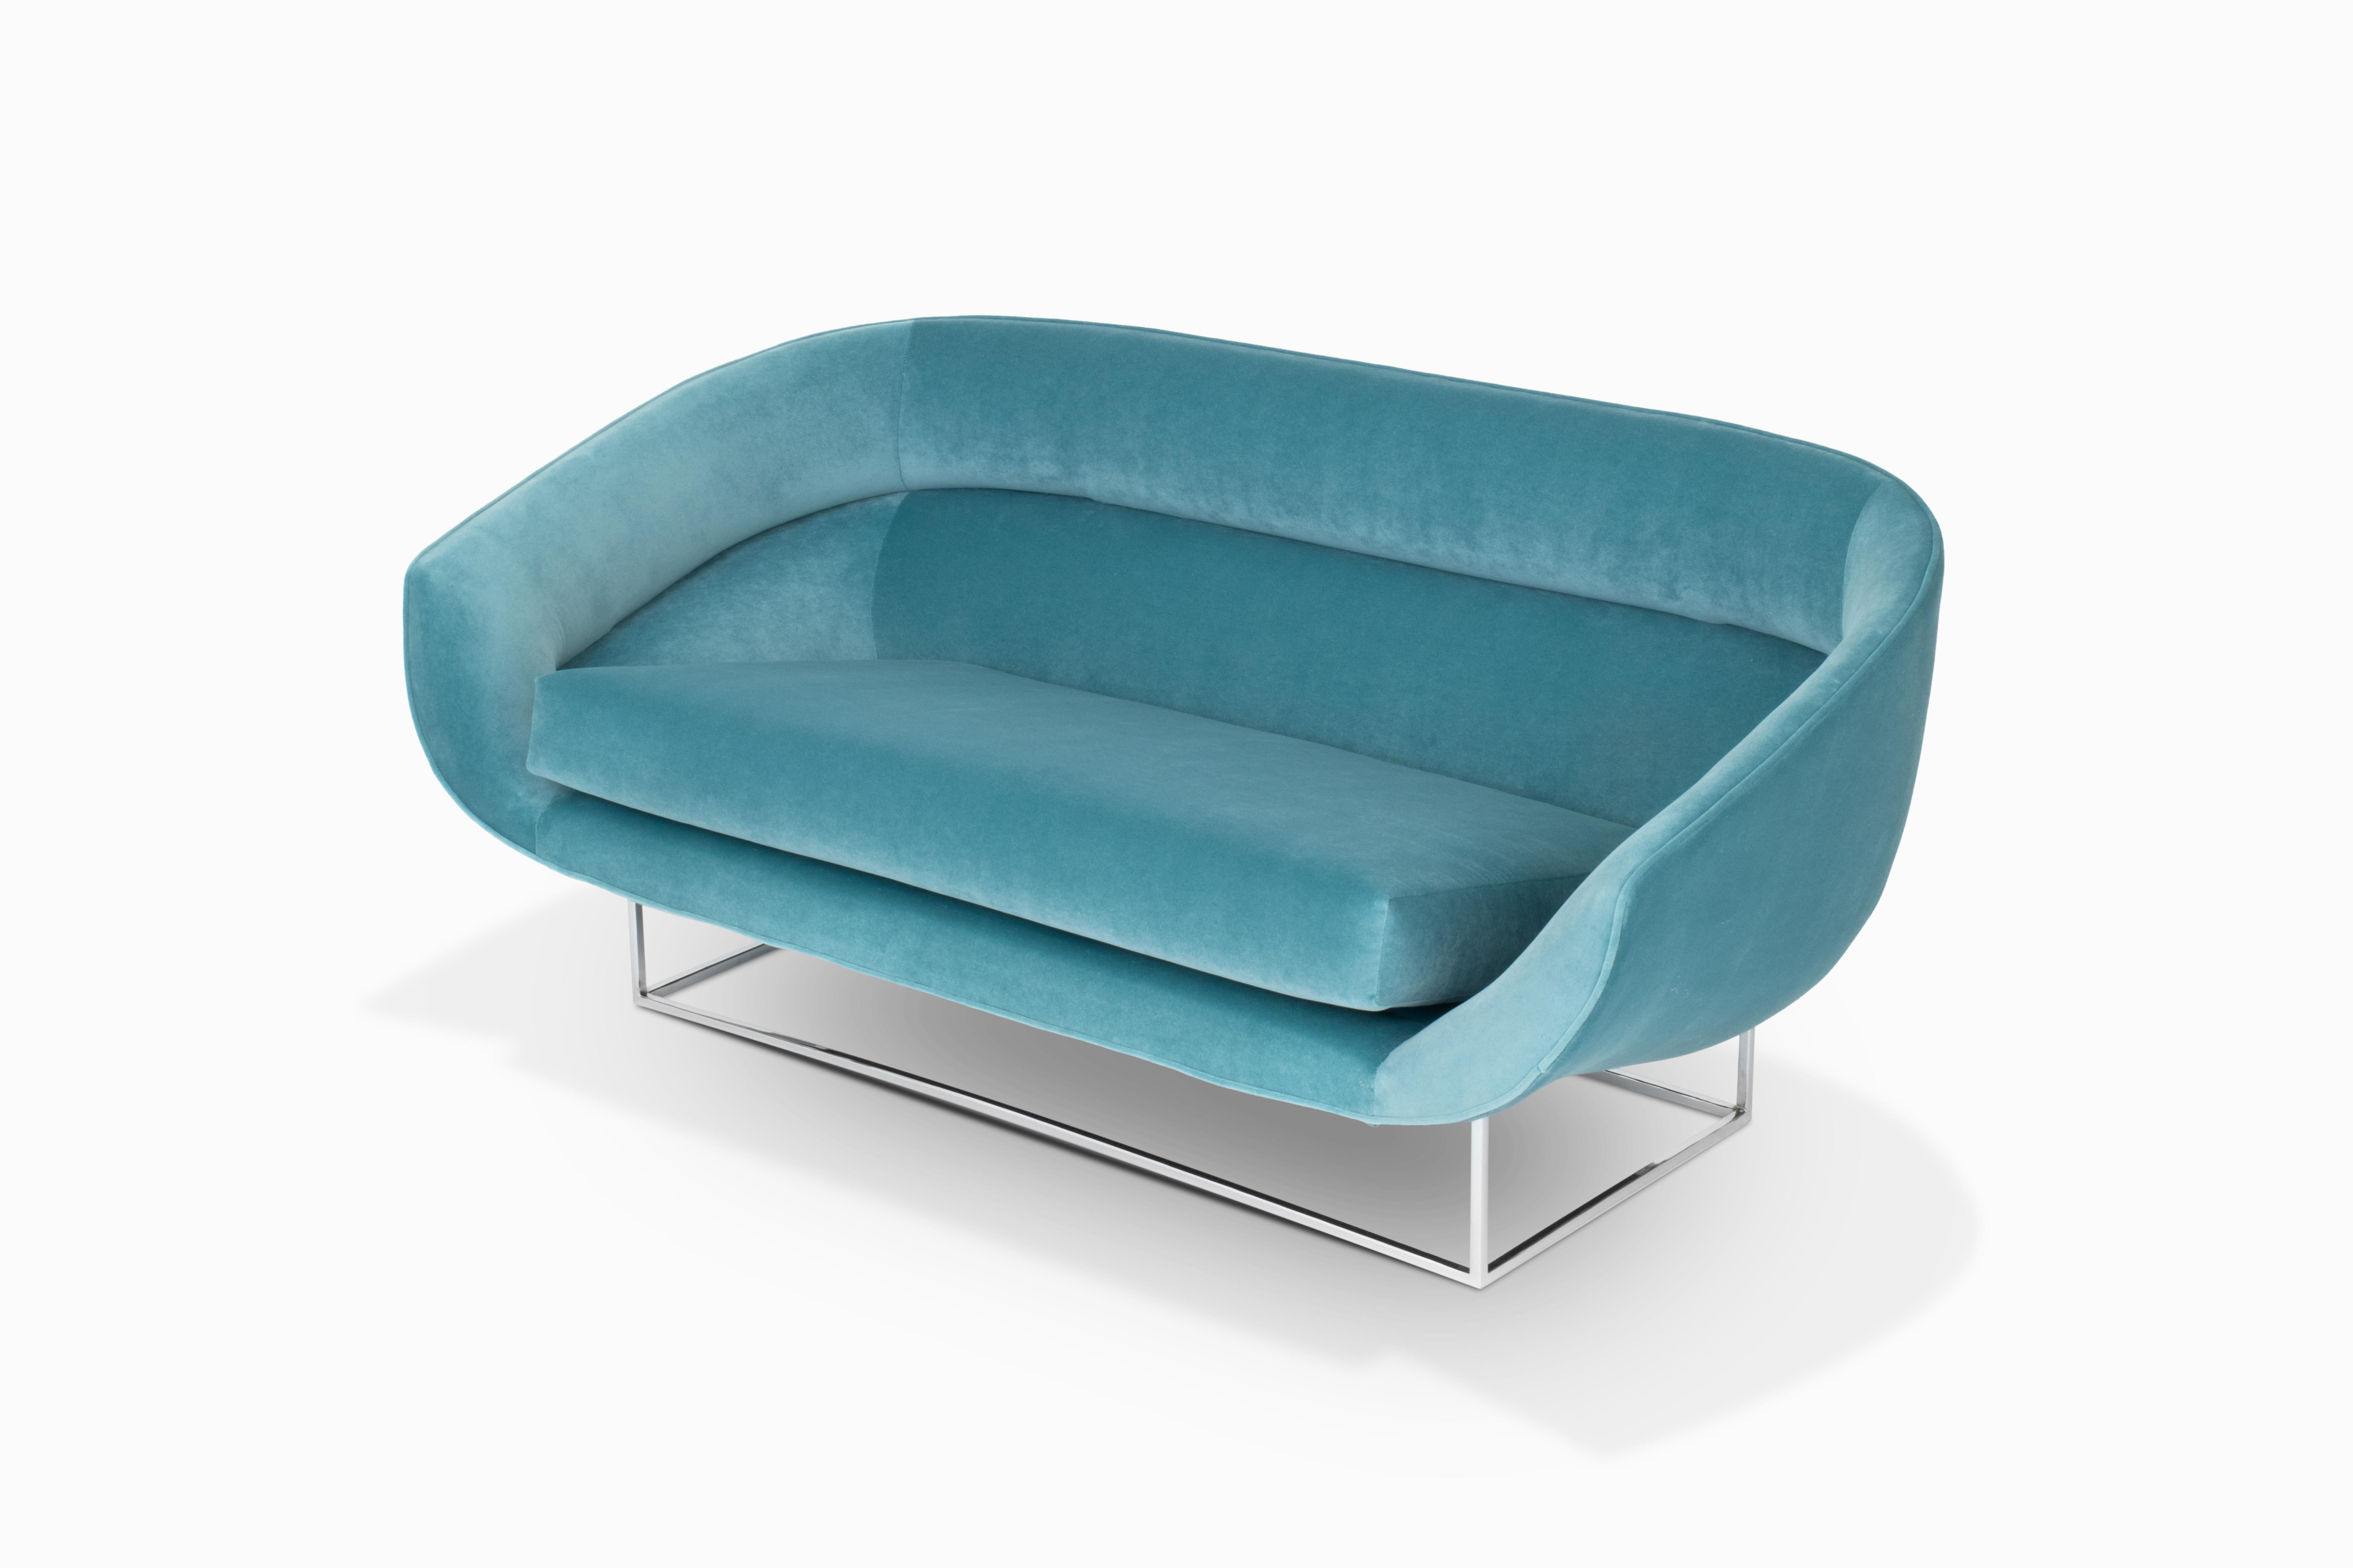 Here is a remarkably beautiful floating sofa by Milo Baughman / Thayer Coggin. The curvaceous seating pod has been reupholstered in a luxurious turquoise blue velvet. And it sits upon a newly chromed metal base. This is an uncommon design by Milo